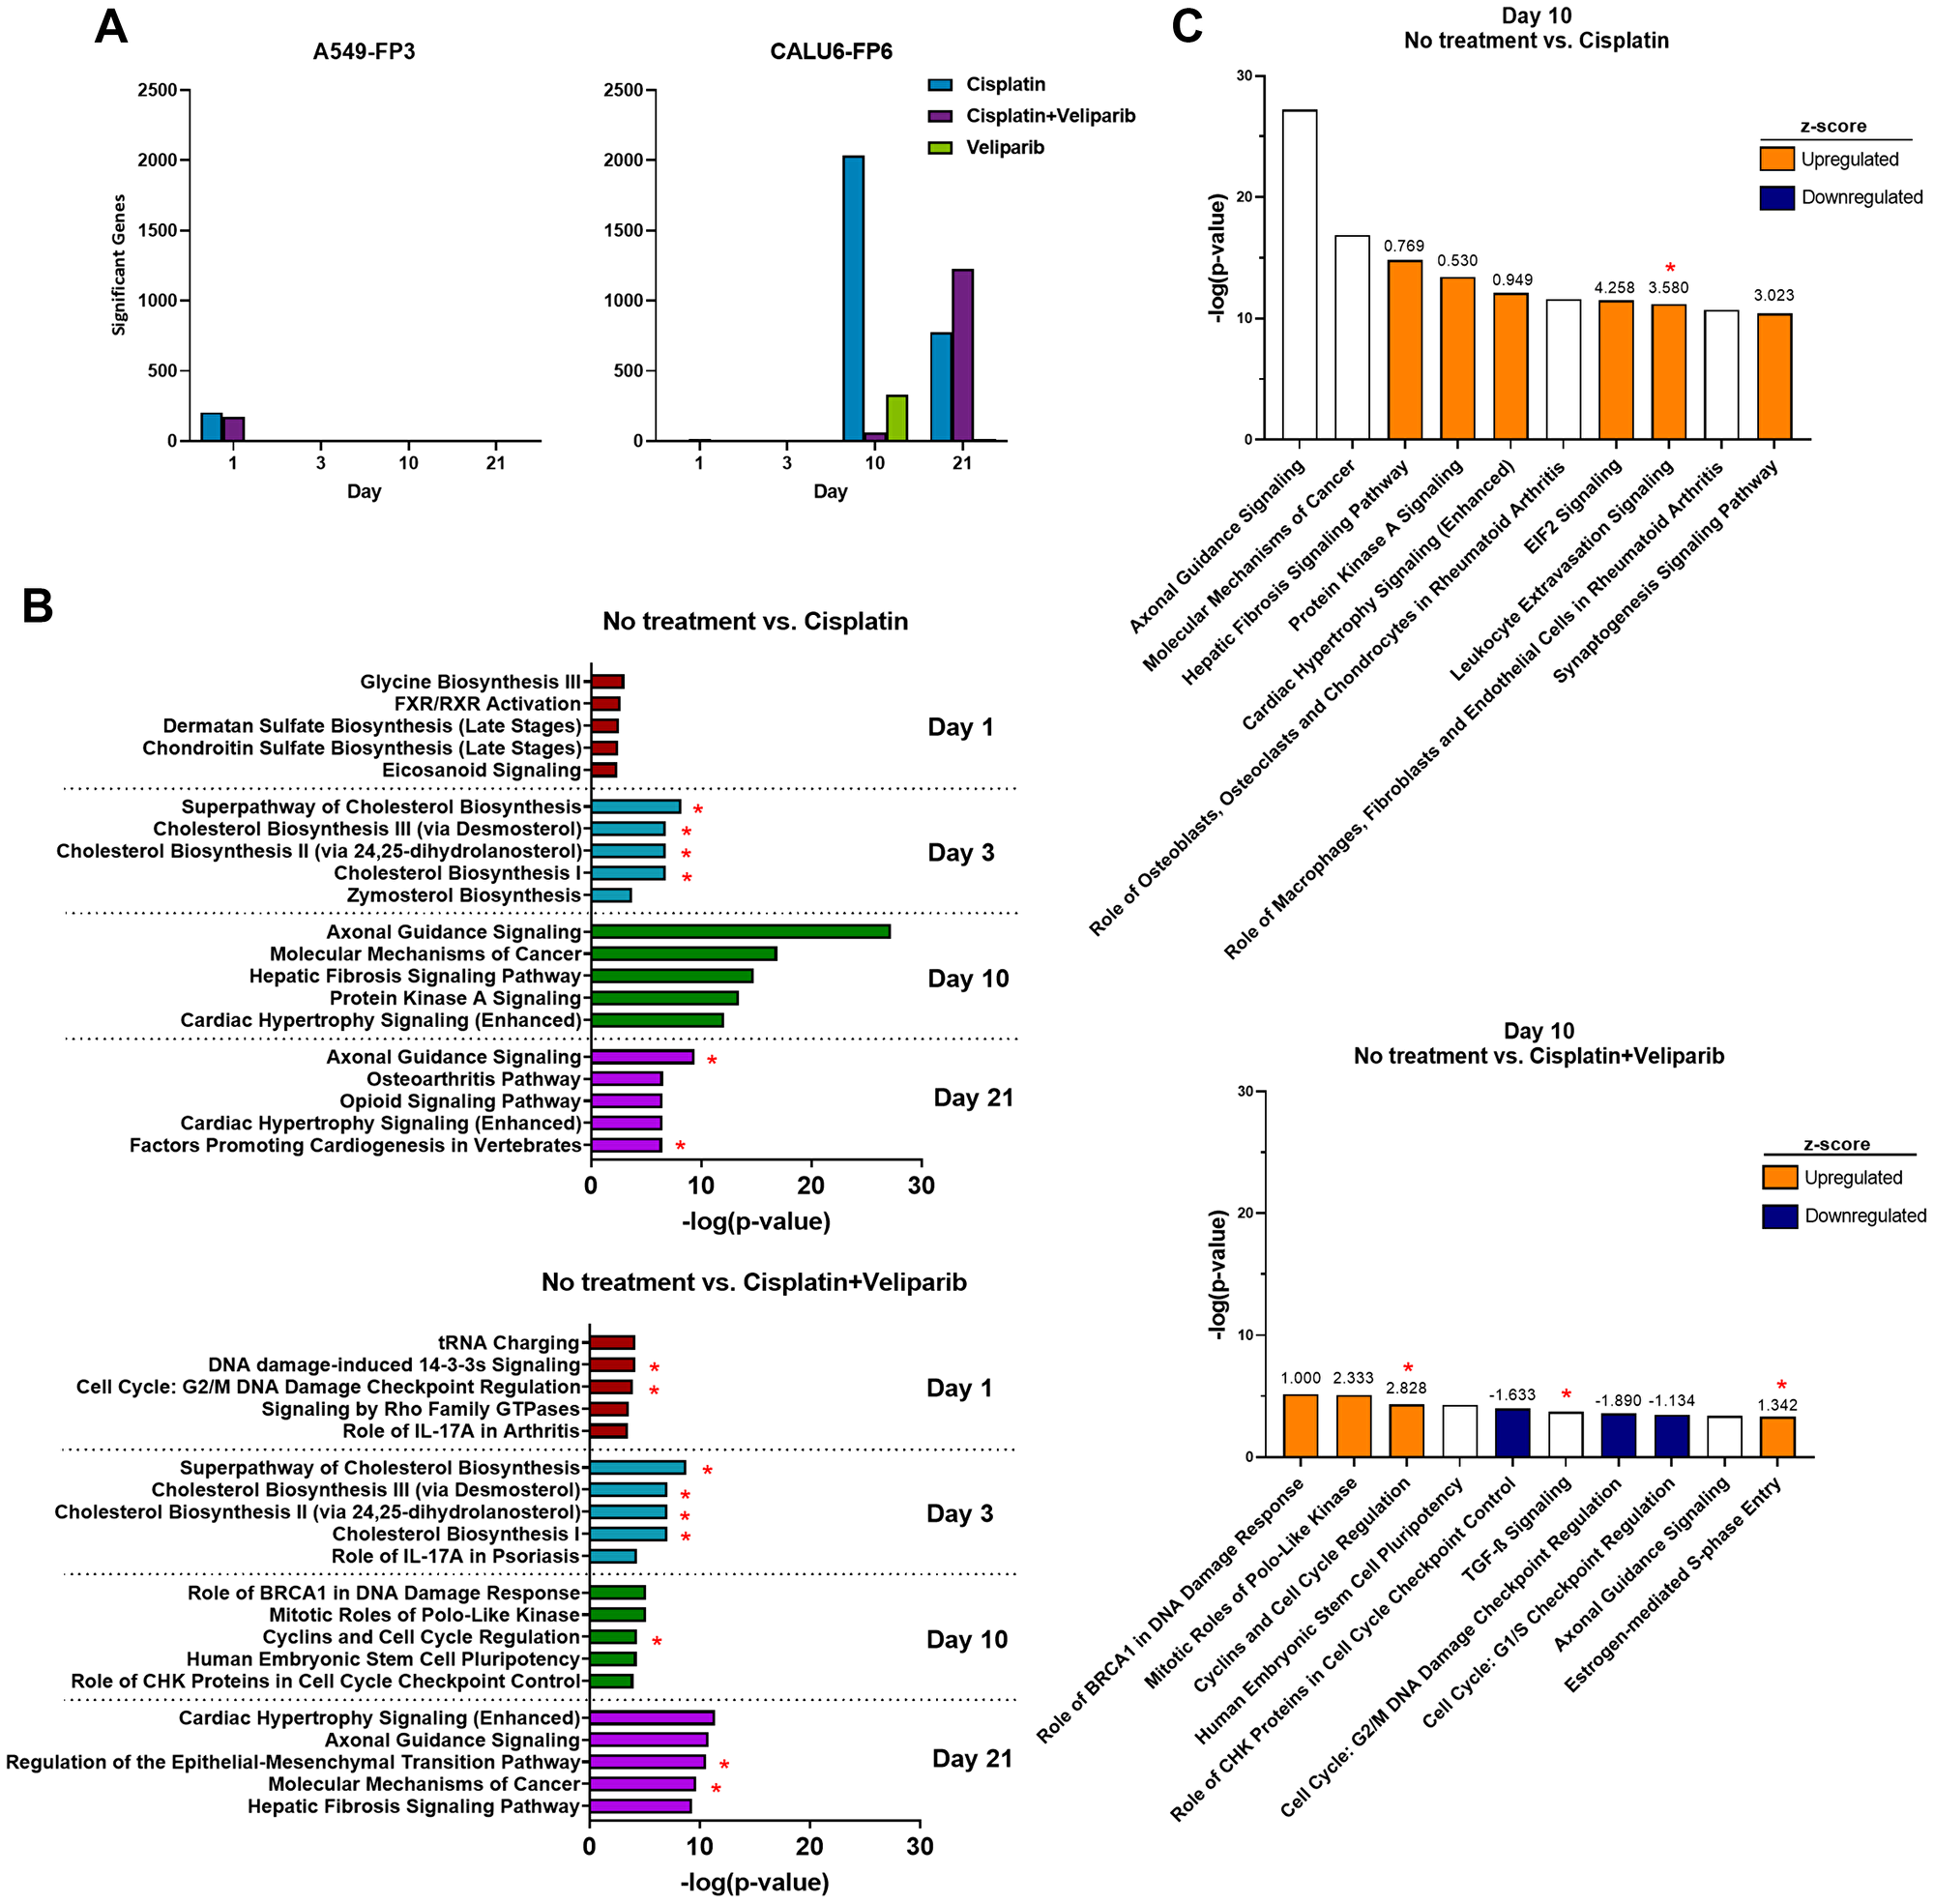 RNA-sequencing and gene ontology enrichment analysis reveal a diverse transcriptional response to cisplatin and veliparib treatment in A549-FP4 and Calu6-FP6 in vivo models.